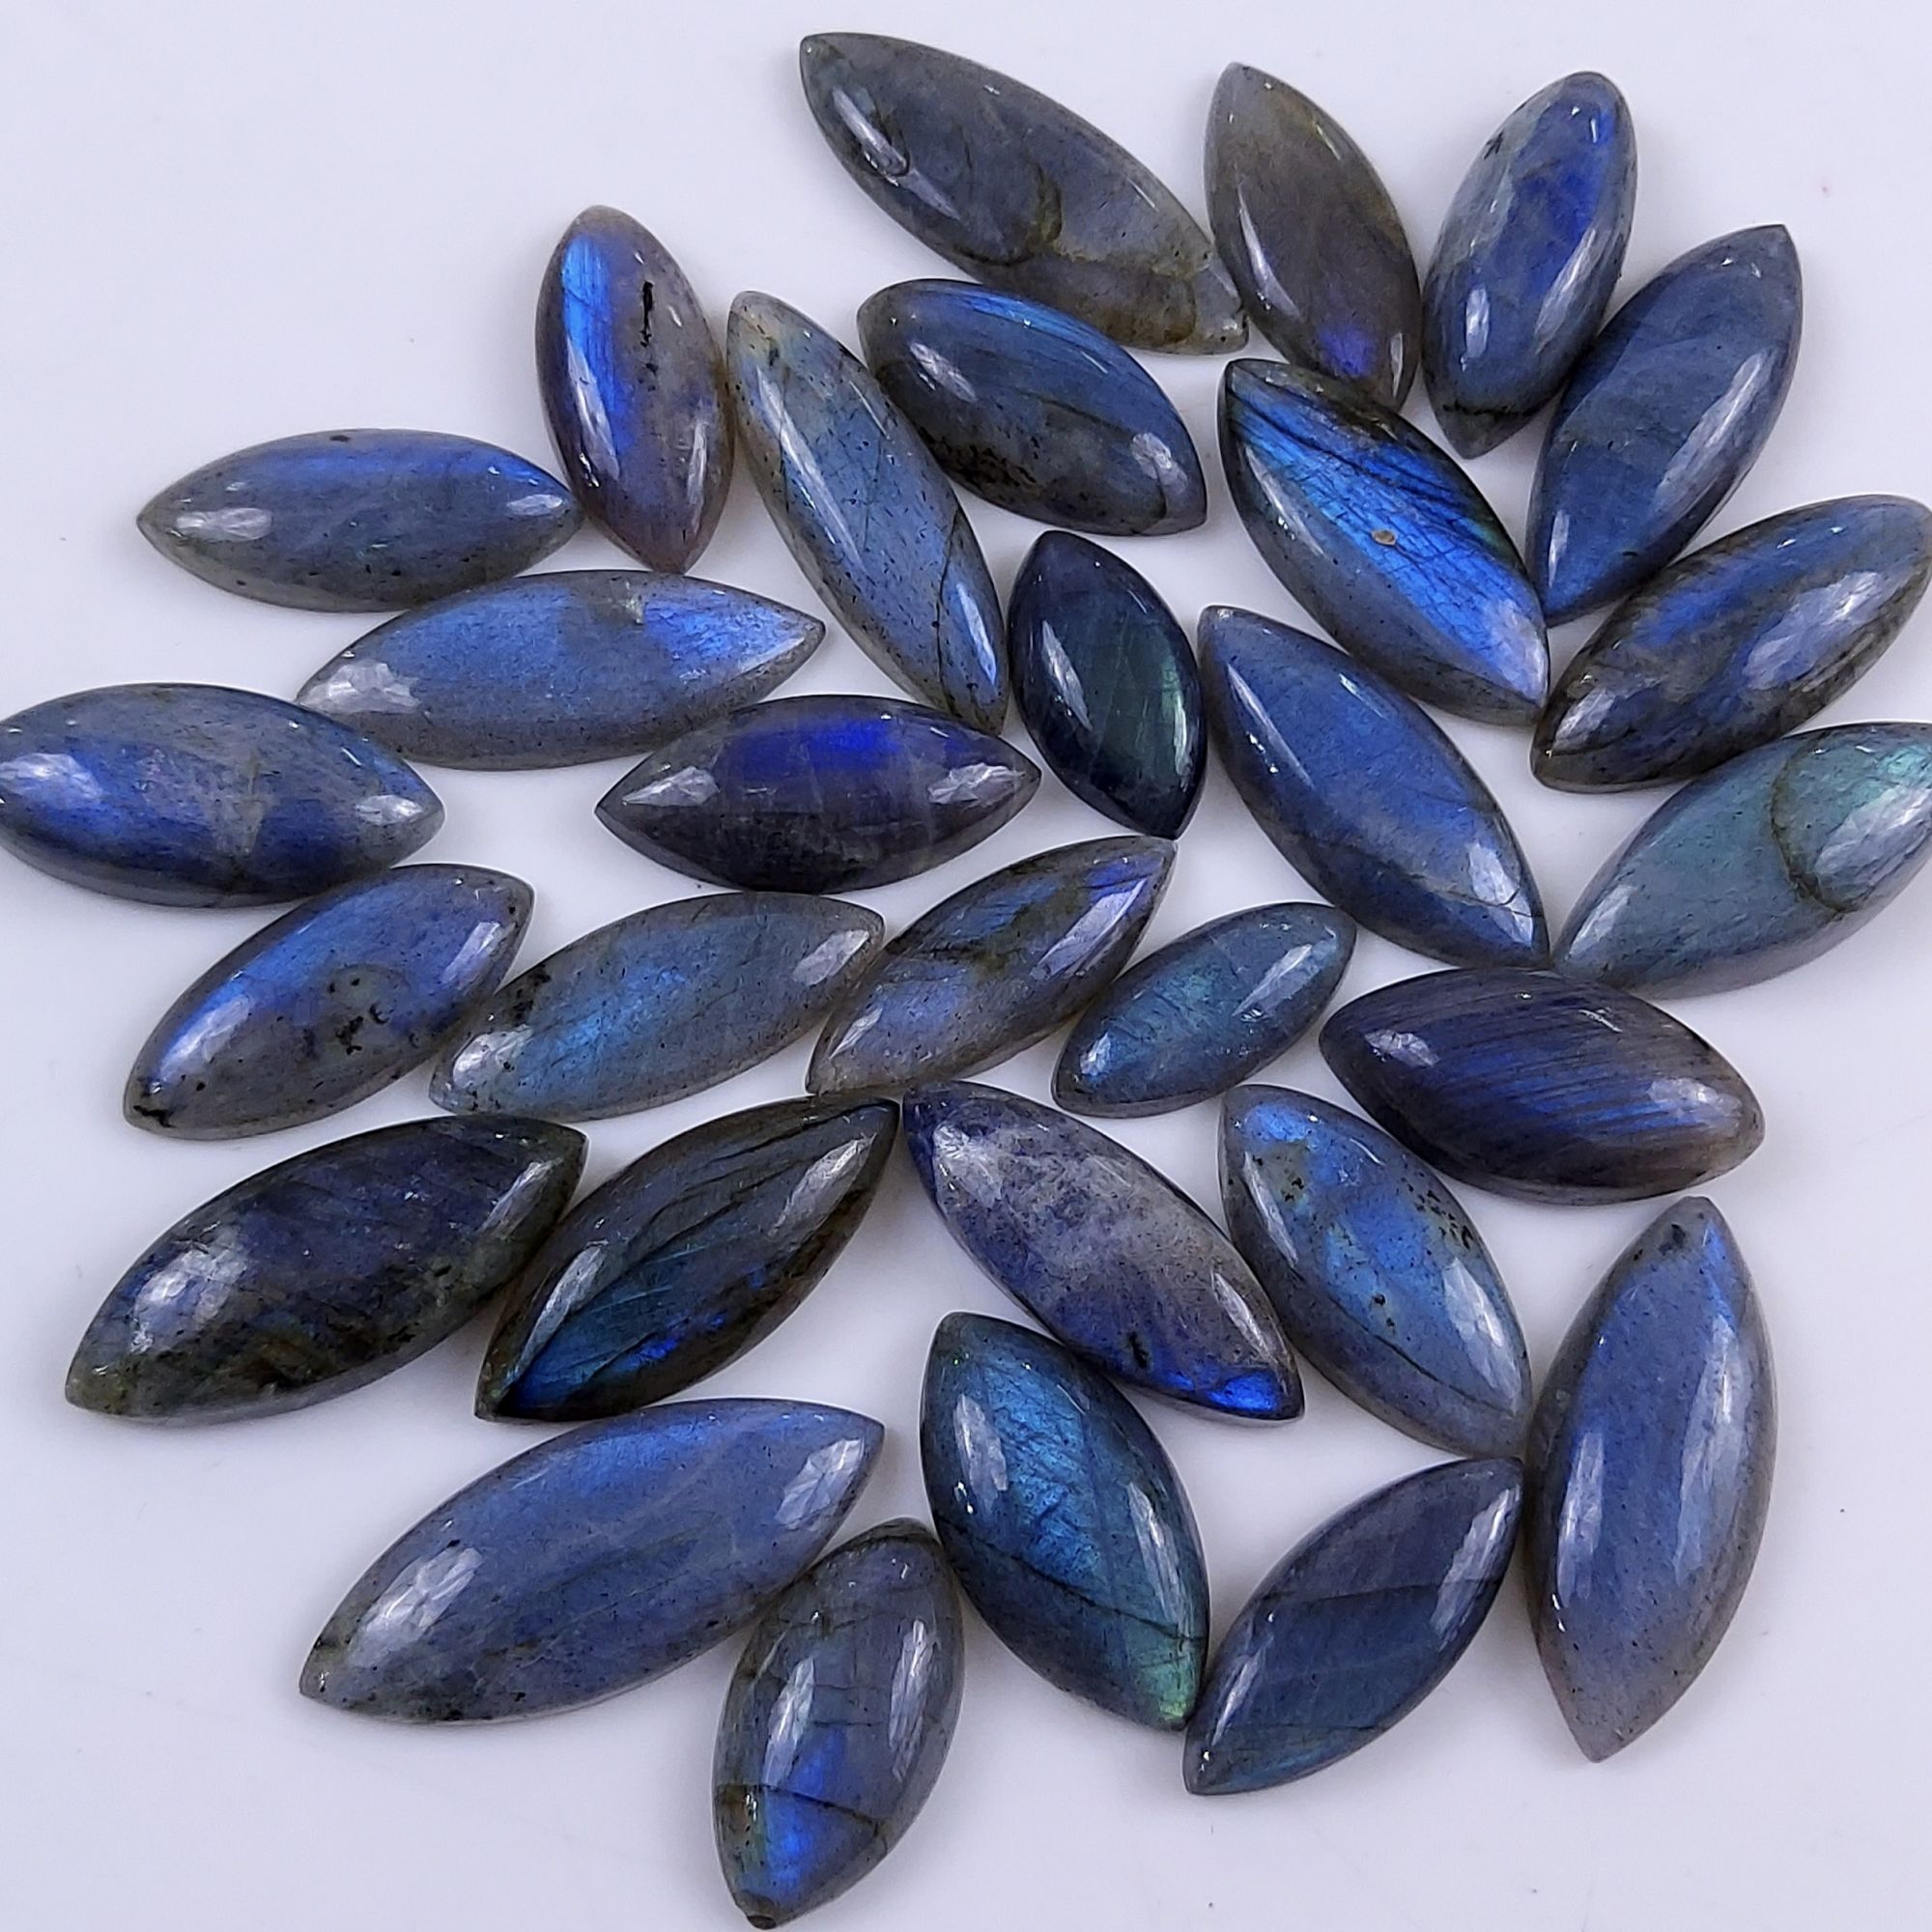 30 Pcs434Cts Natural Multifire Labradorite Loose Cabochon Marquise Gemstone Lot for Jewelry Making  28x10 18x8mm#1078